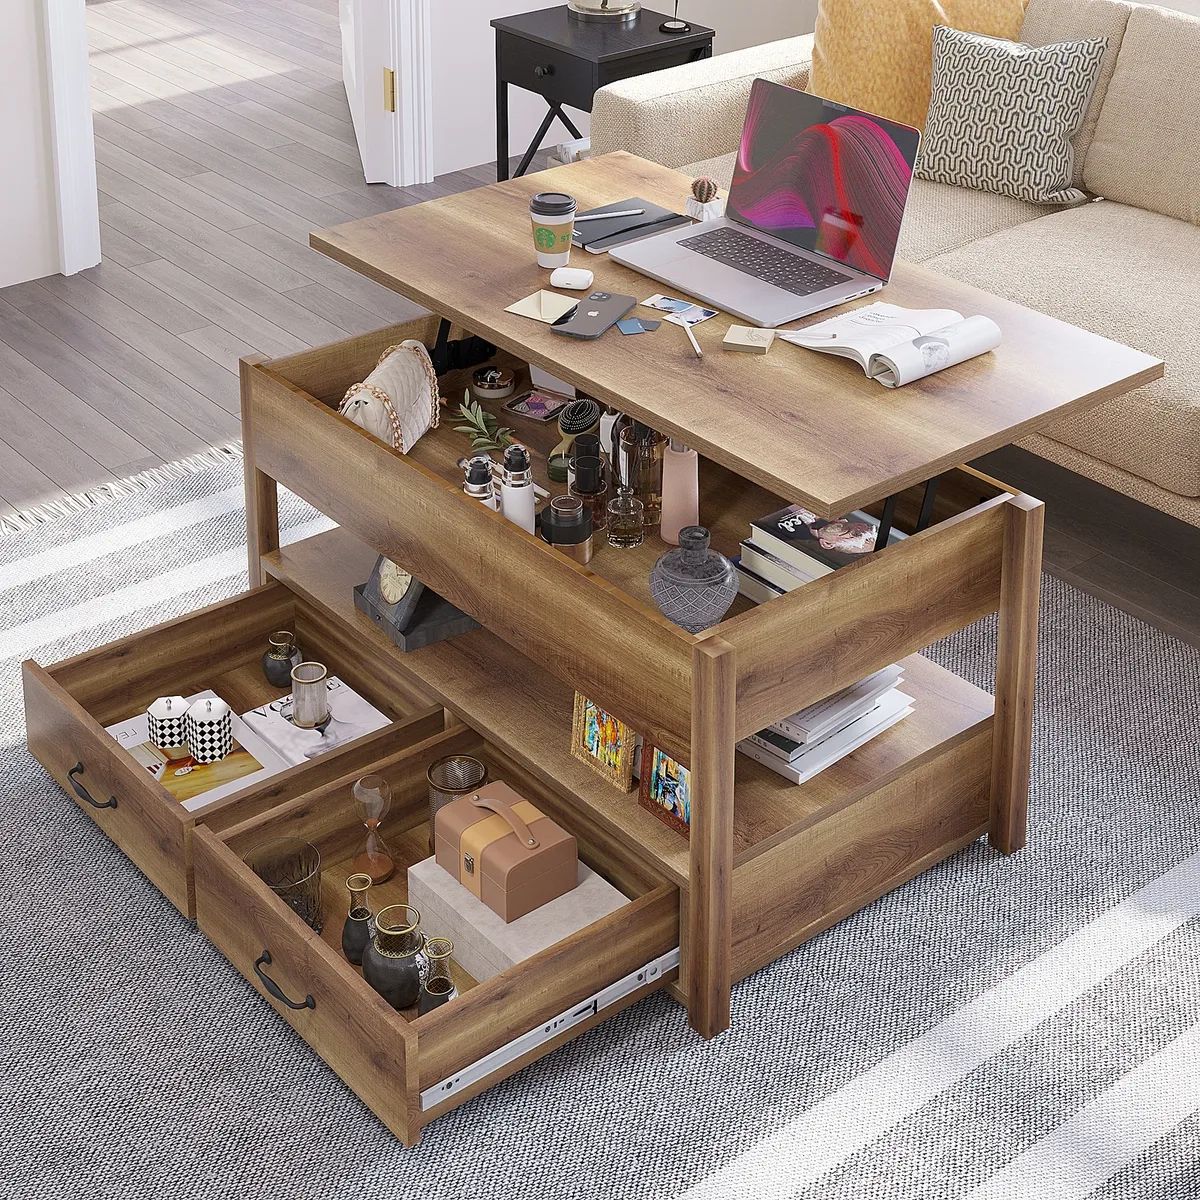 2 Drawer Lift Top Coffee Table Wooden With Hidden Compartment & Storage  Shelves | Ebay Regarding Lift Top Coffee Tables With Storage Drawers (Photo 1 of 15)